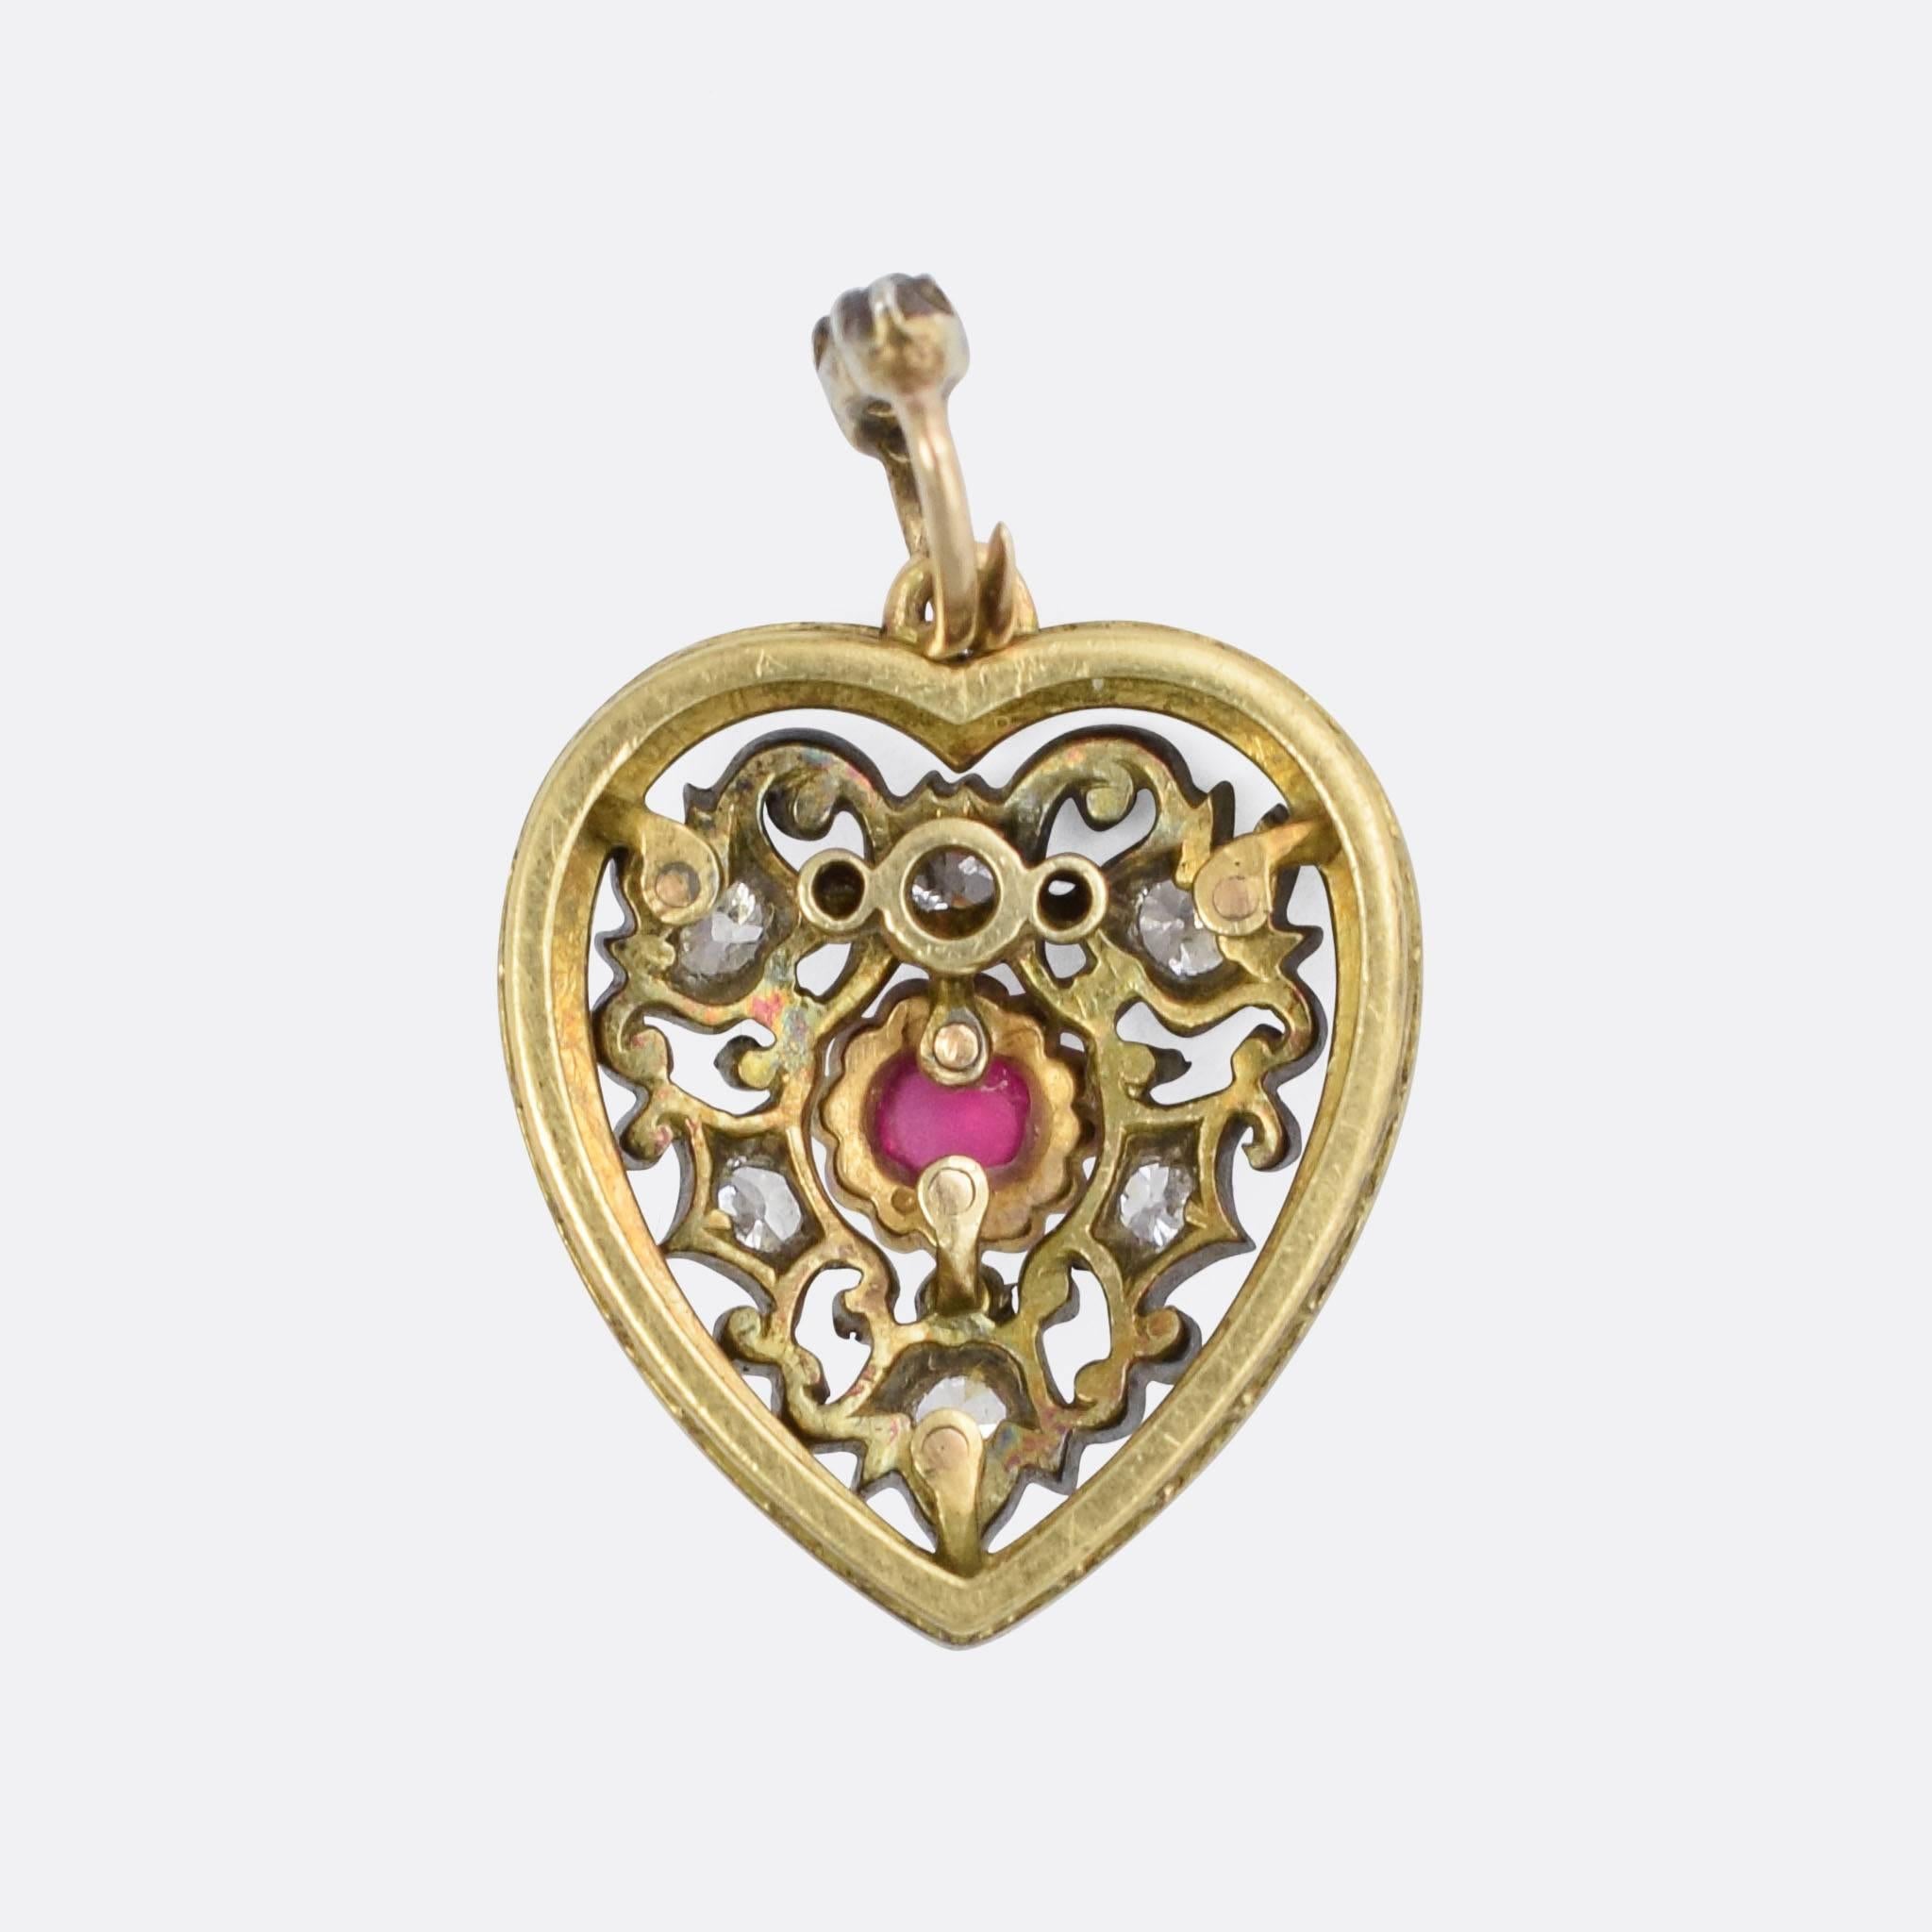 A beautiful Victorian Heart Pendant, set with a natural ruby cabochon and old mine cut diamonds. The diamonds rest in intricate openworked mounts, bordered with white enamel, and complete with the original diamond-set bail. Modelled in 18k gold with